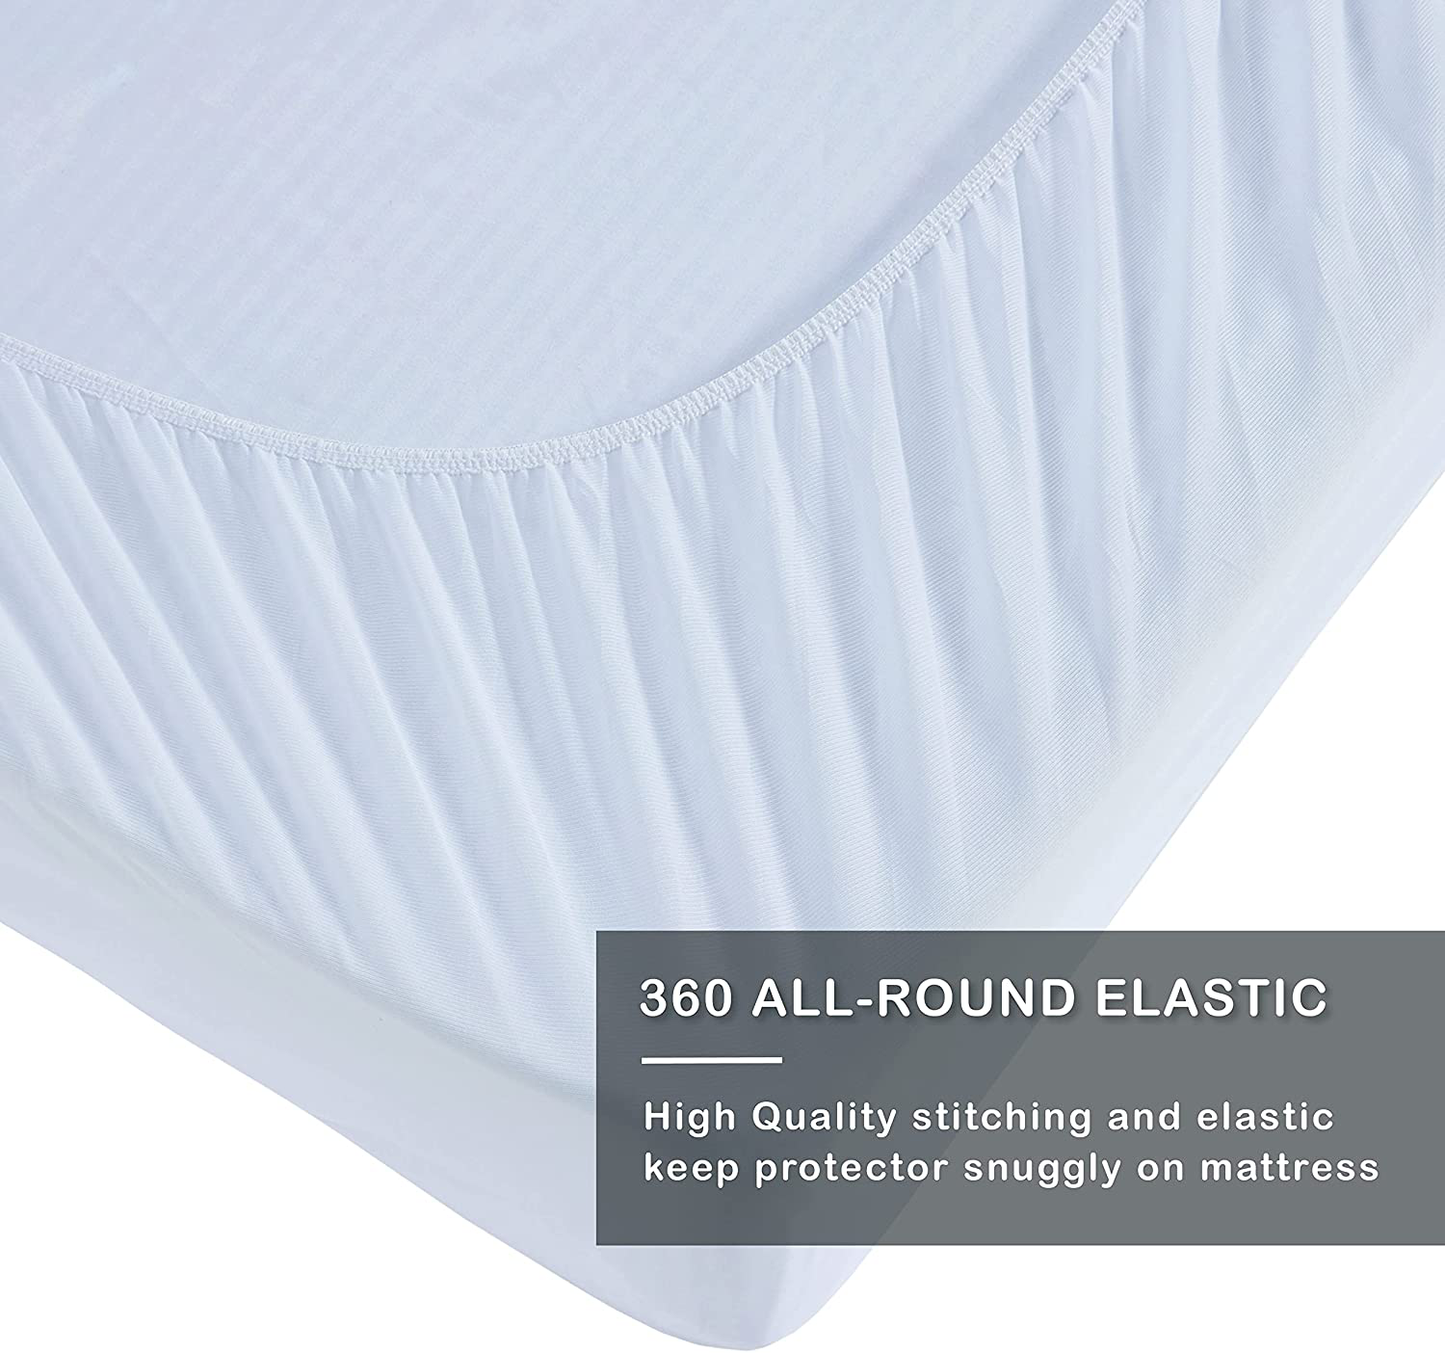 Degrees of Comfort Premium Soft Waterproof Mattress Pad Twin Size | Quilted Topper Fitted 13'' Inch Deep Pocket 3M Scotchgard Stain Resistant Protector Cover | Cooling, Washable, Breathable